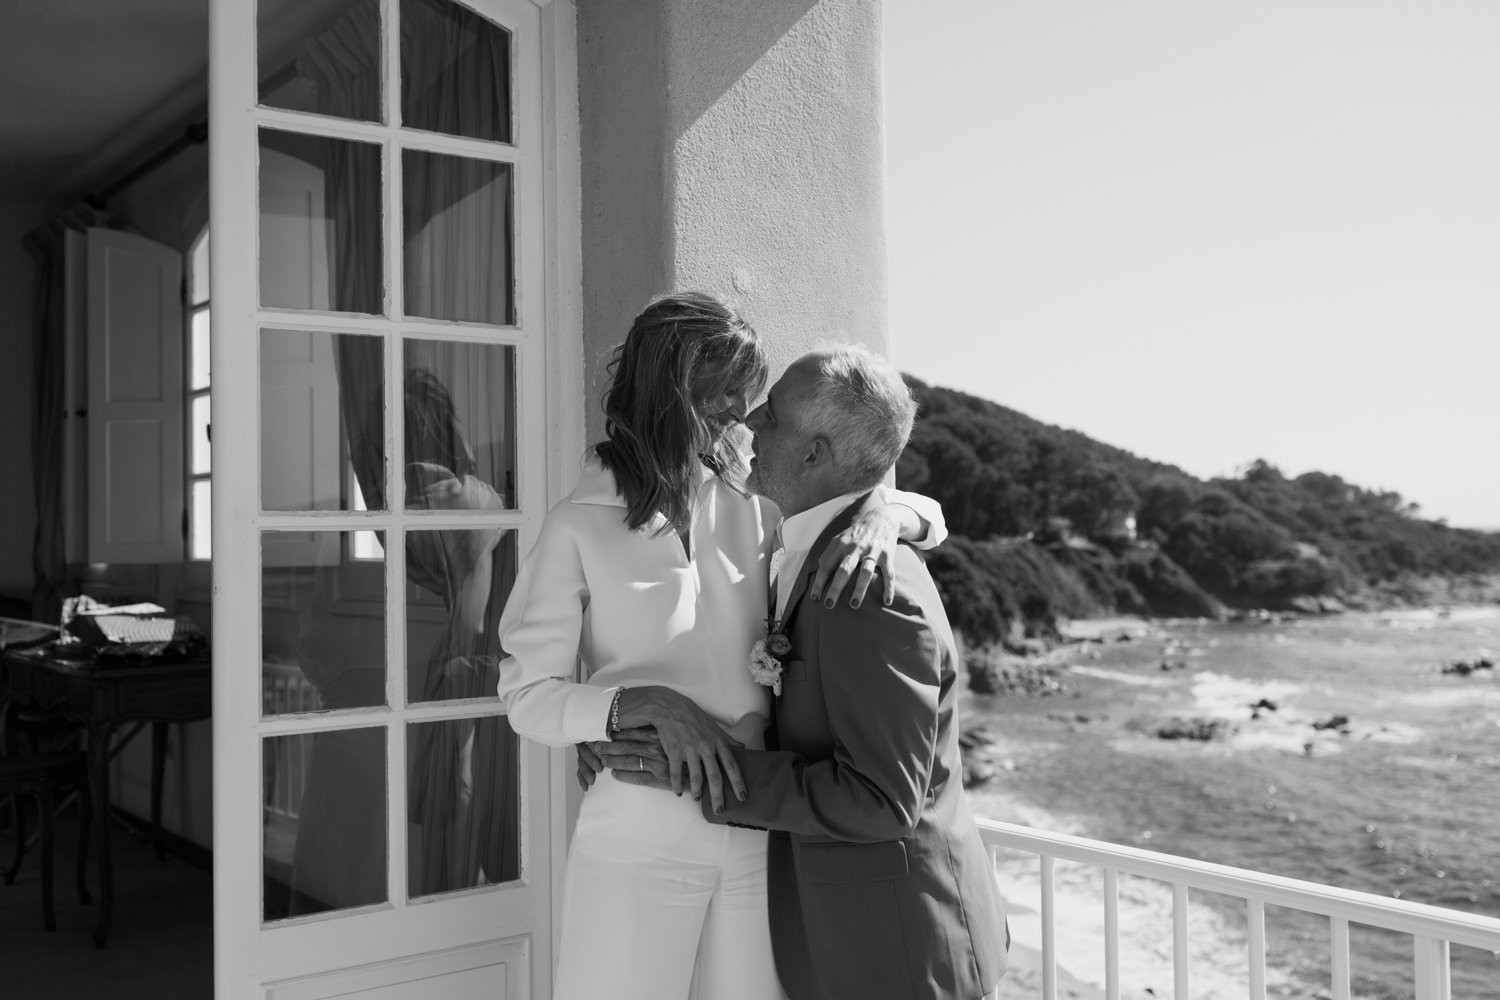 wedding marriage mariage photographe corse corsica ajaccio Krista Espino Anza Creative family photography mairee maire courthouse france french le maquis hotel-44.jpg